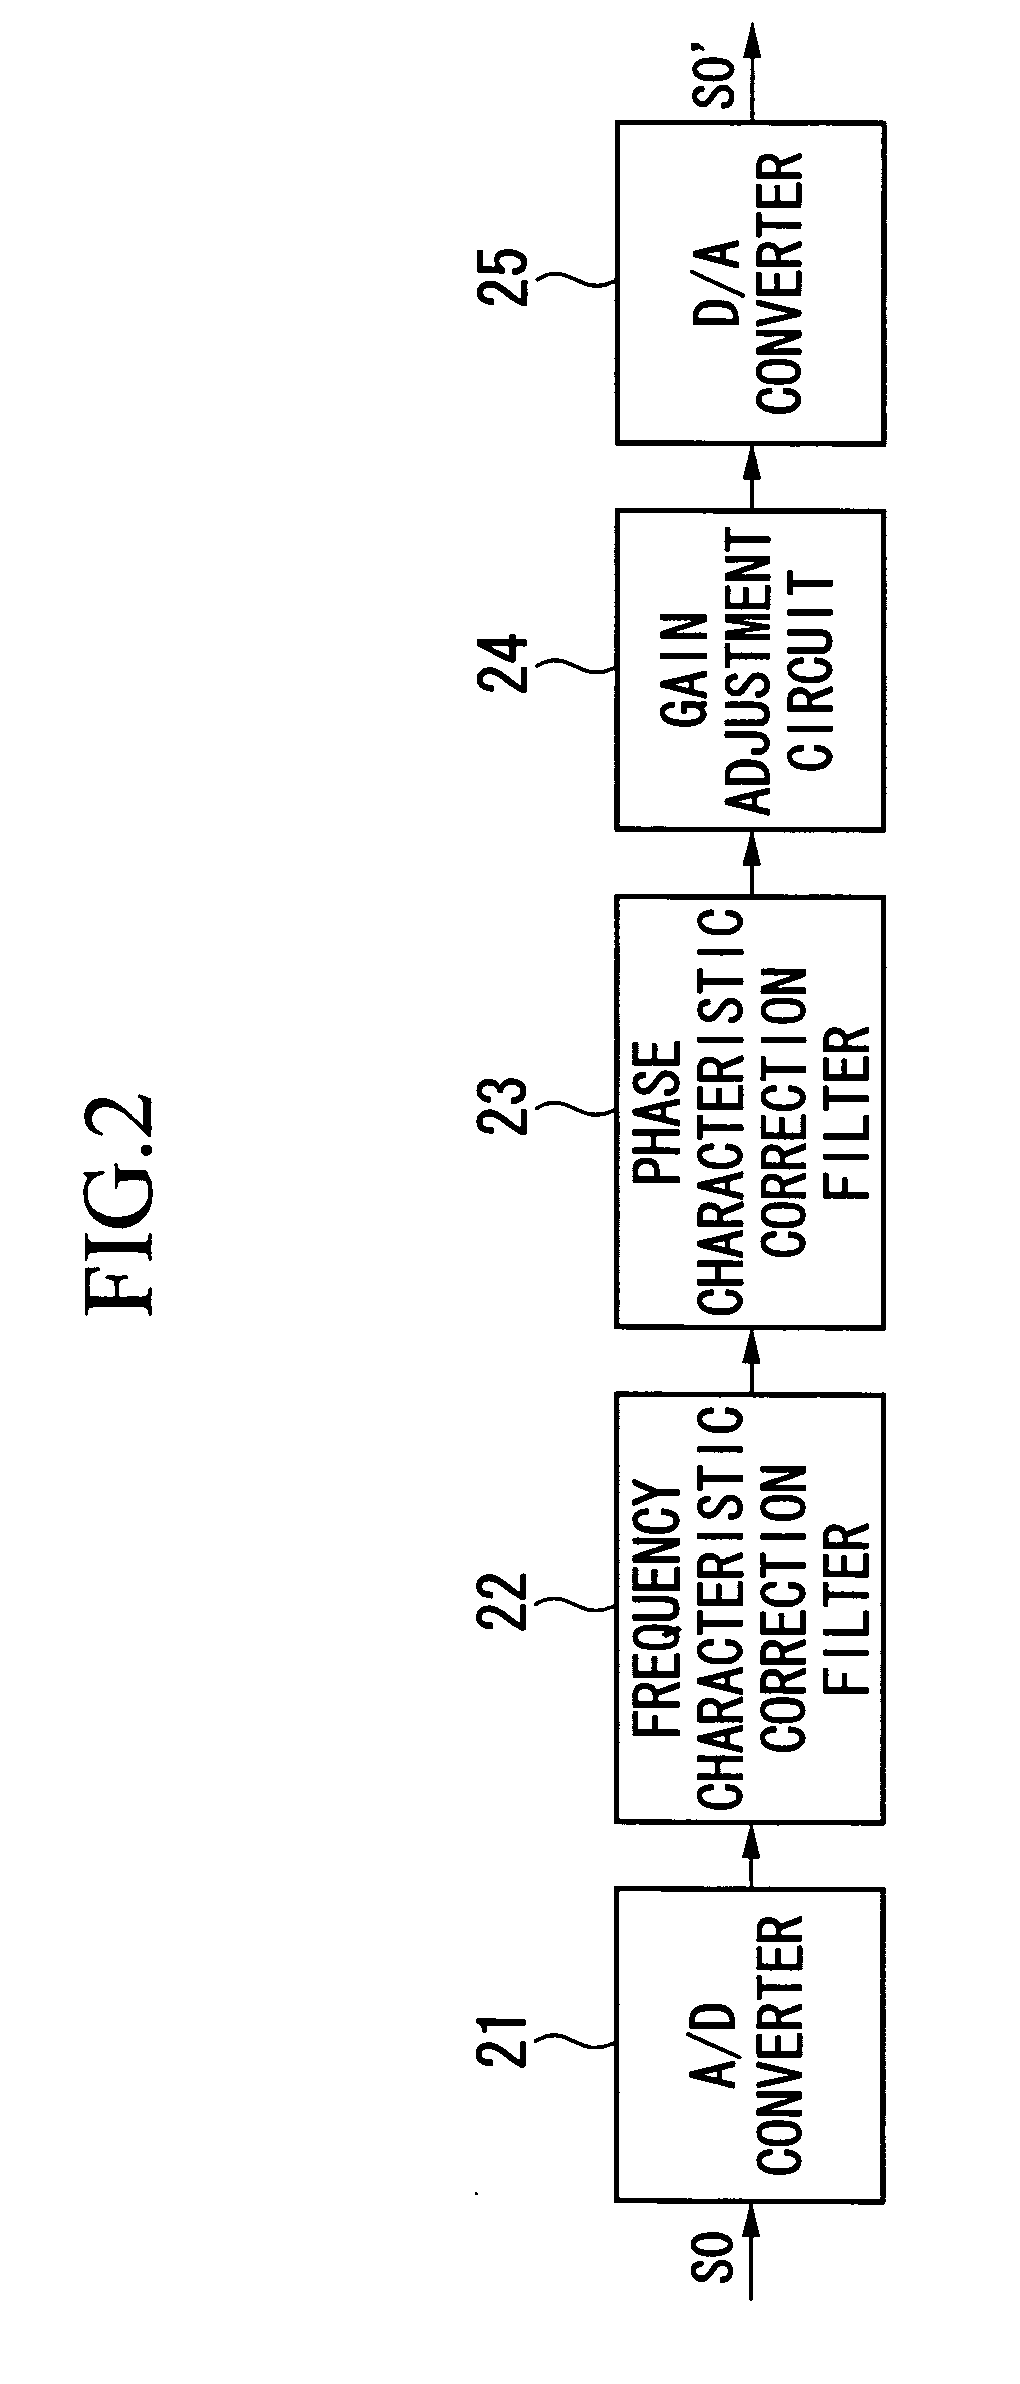 Audio characteristic correction system